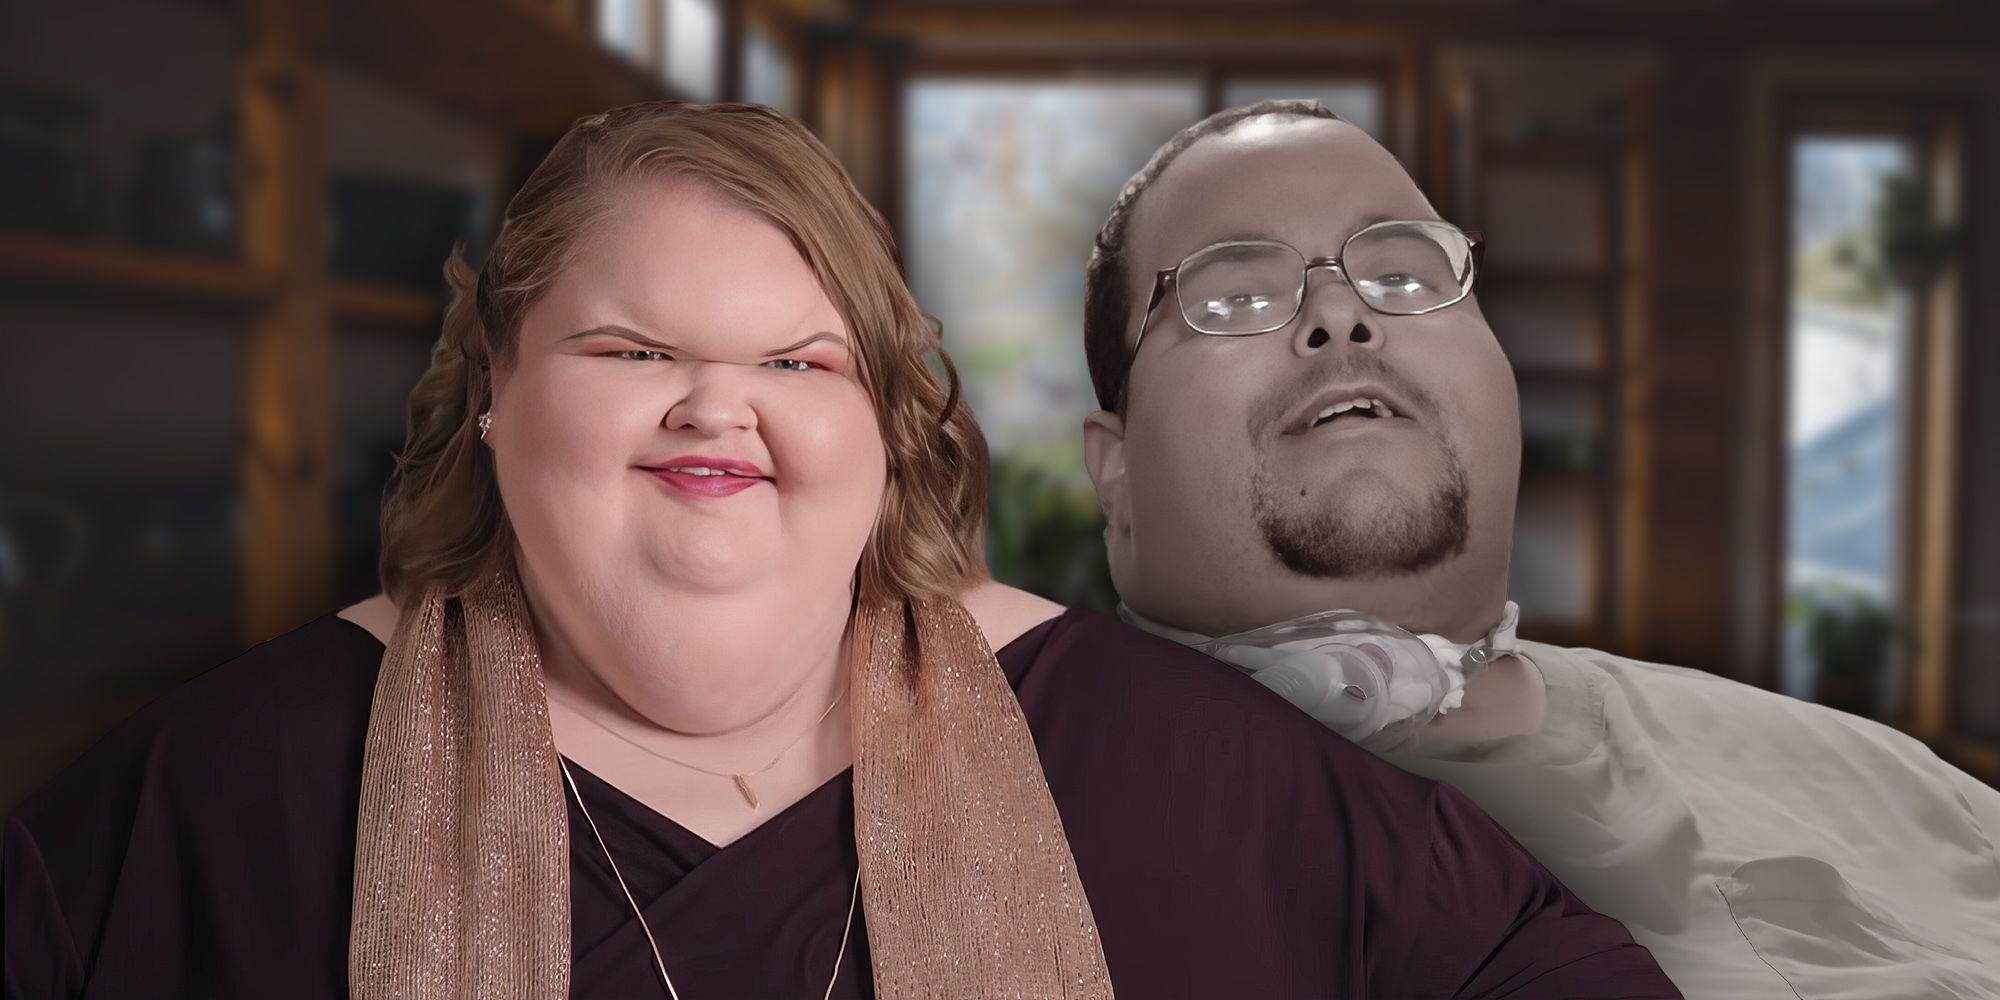 Tammy Slaton and Caleb Willingham from 1000-lb Sisters smiling and relaxing together